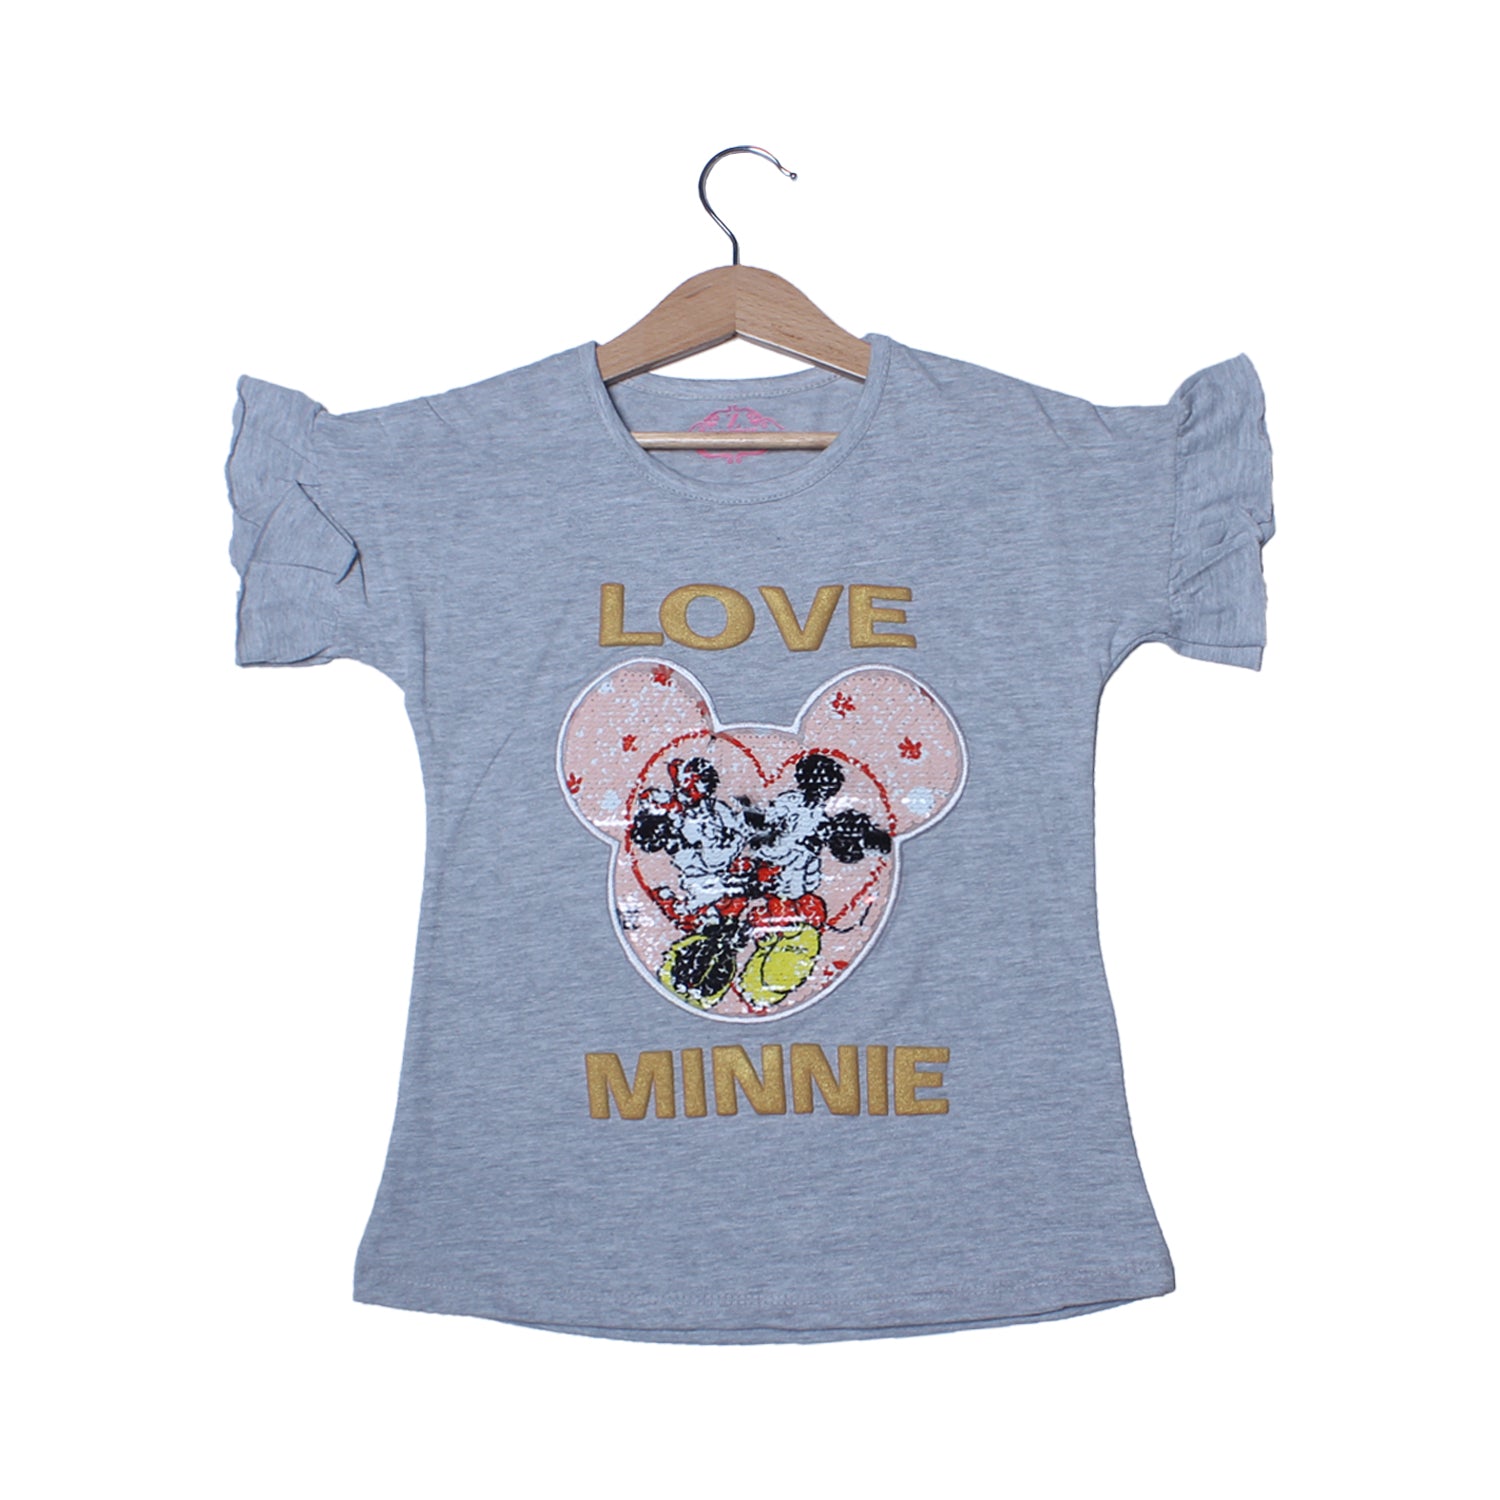 NEW GREY LOVE MINNIE WITH FACE PATCH T-SHIRT TOP FOR GIRLS